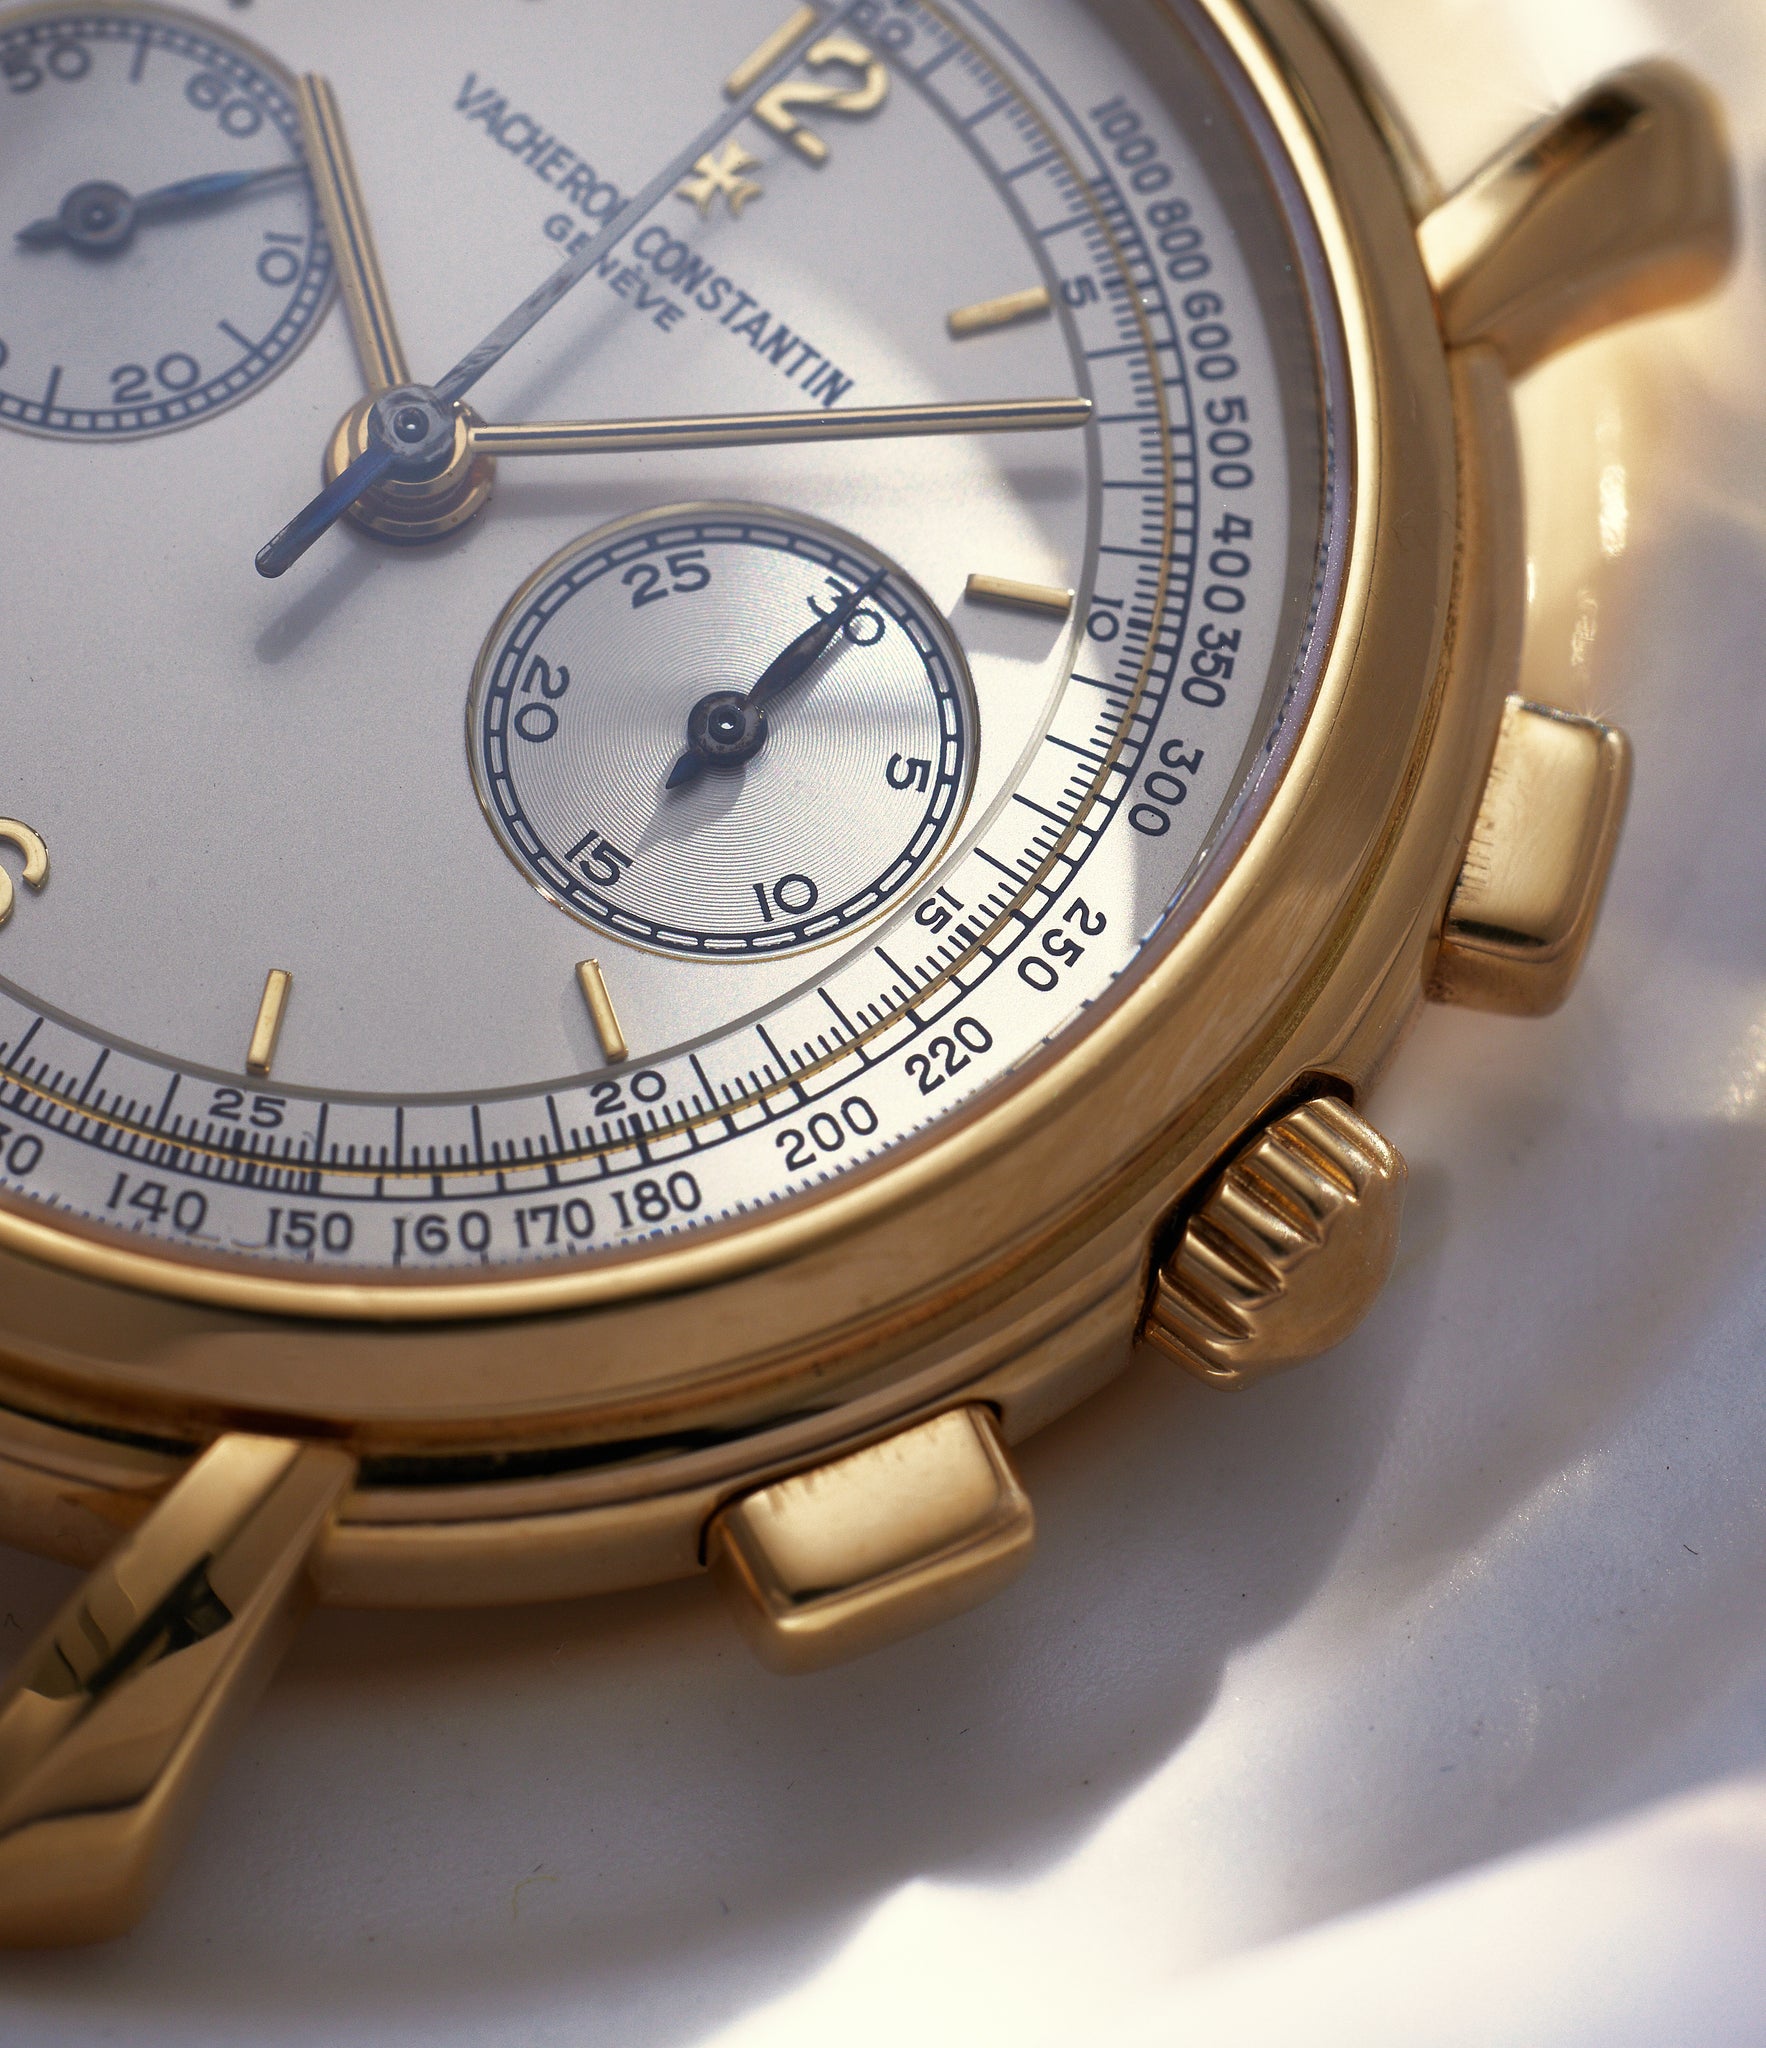 Vacheron Constantin Les Historiques Chronograph 47101/000J-4 | Dial | Yellow Gold | Available Worldwide at A Collected Man